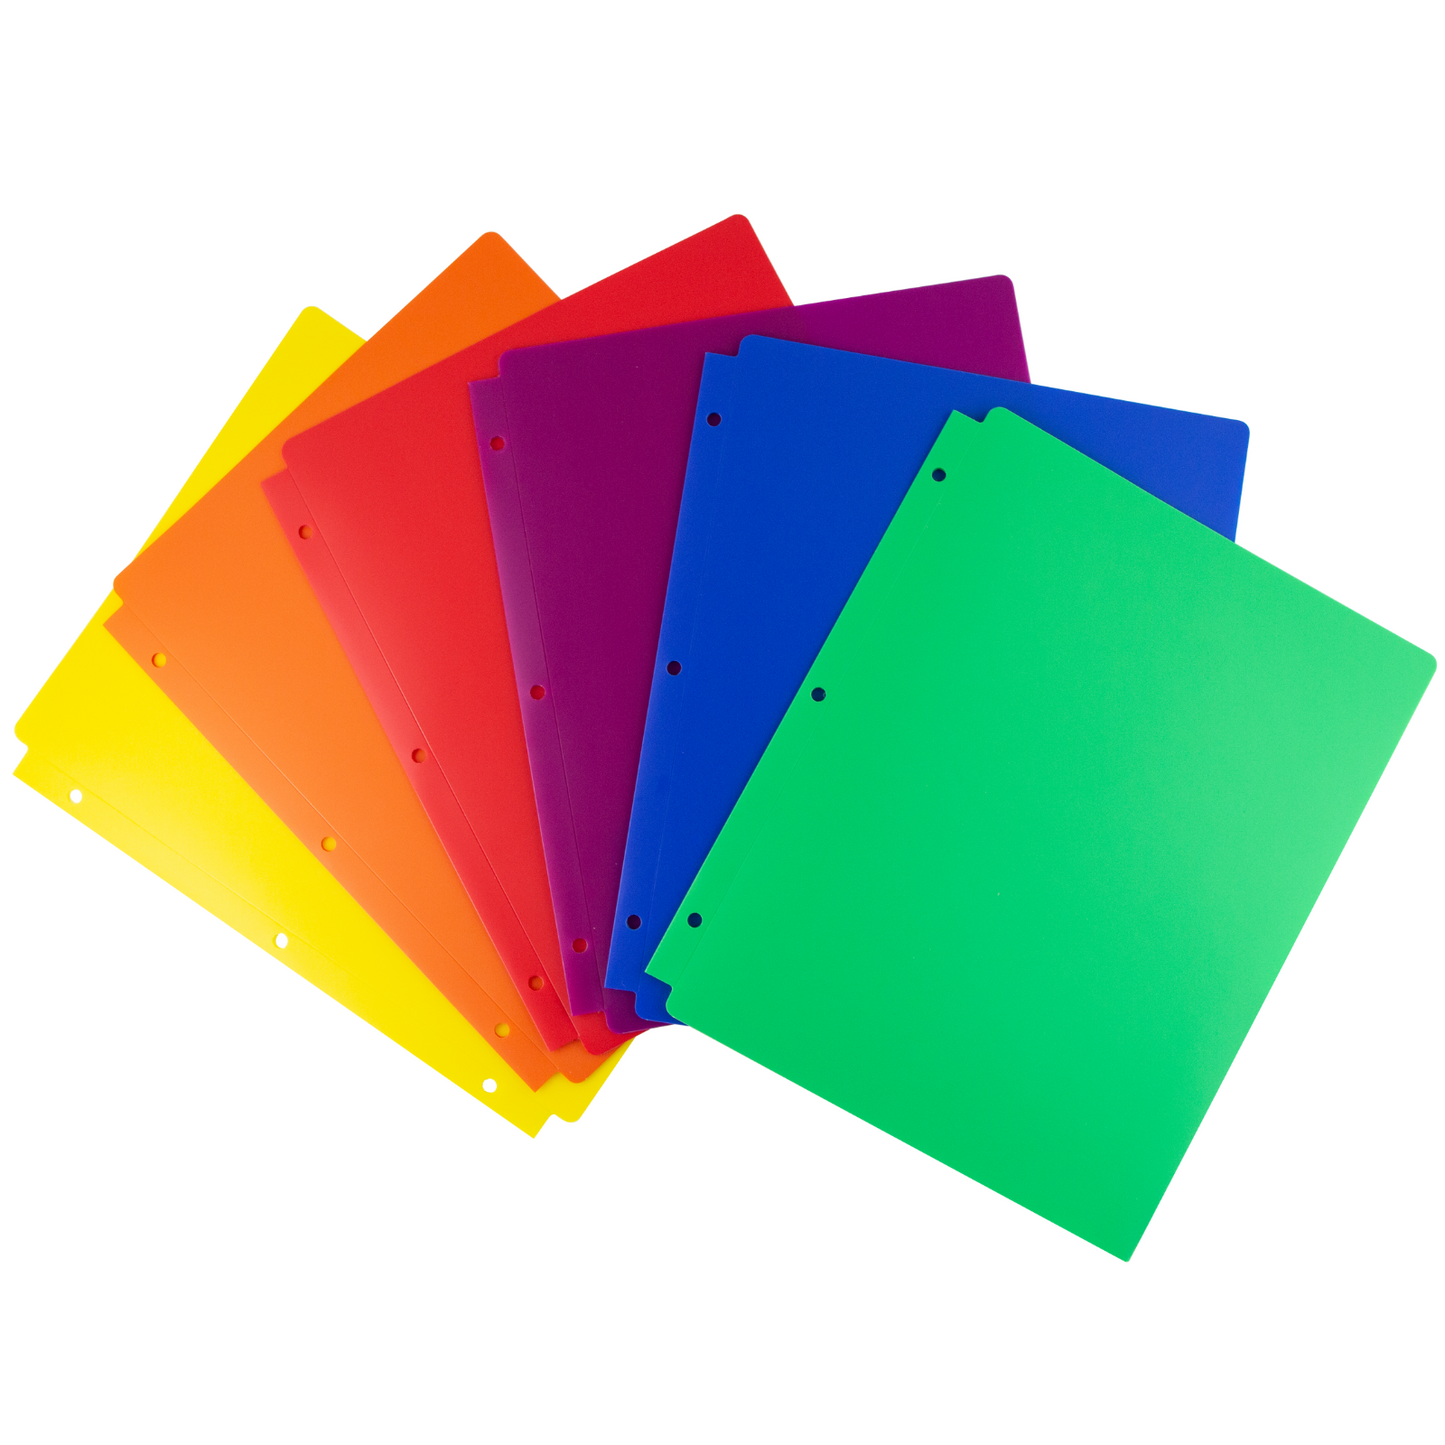 RYWESNIY Heavy Duty Plastic Folders with Clear Front Pocket,2 Pocket  Folders with 3 Hole Punch,Assorted Colors,8 Pack